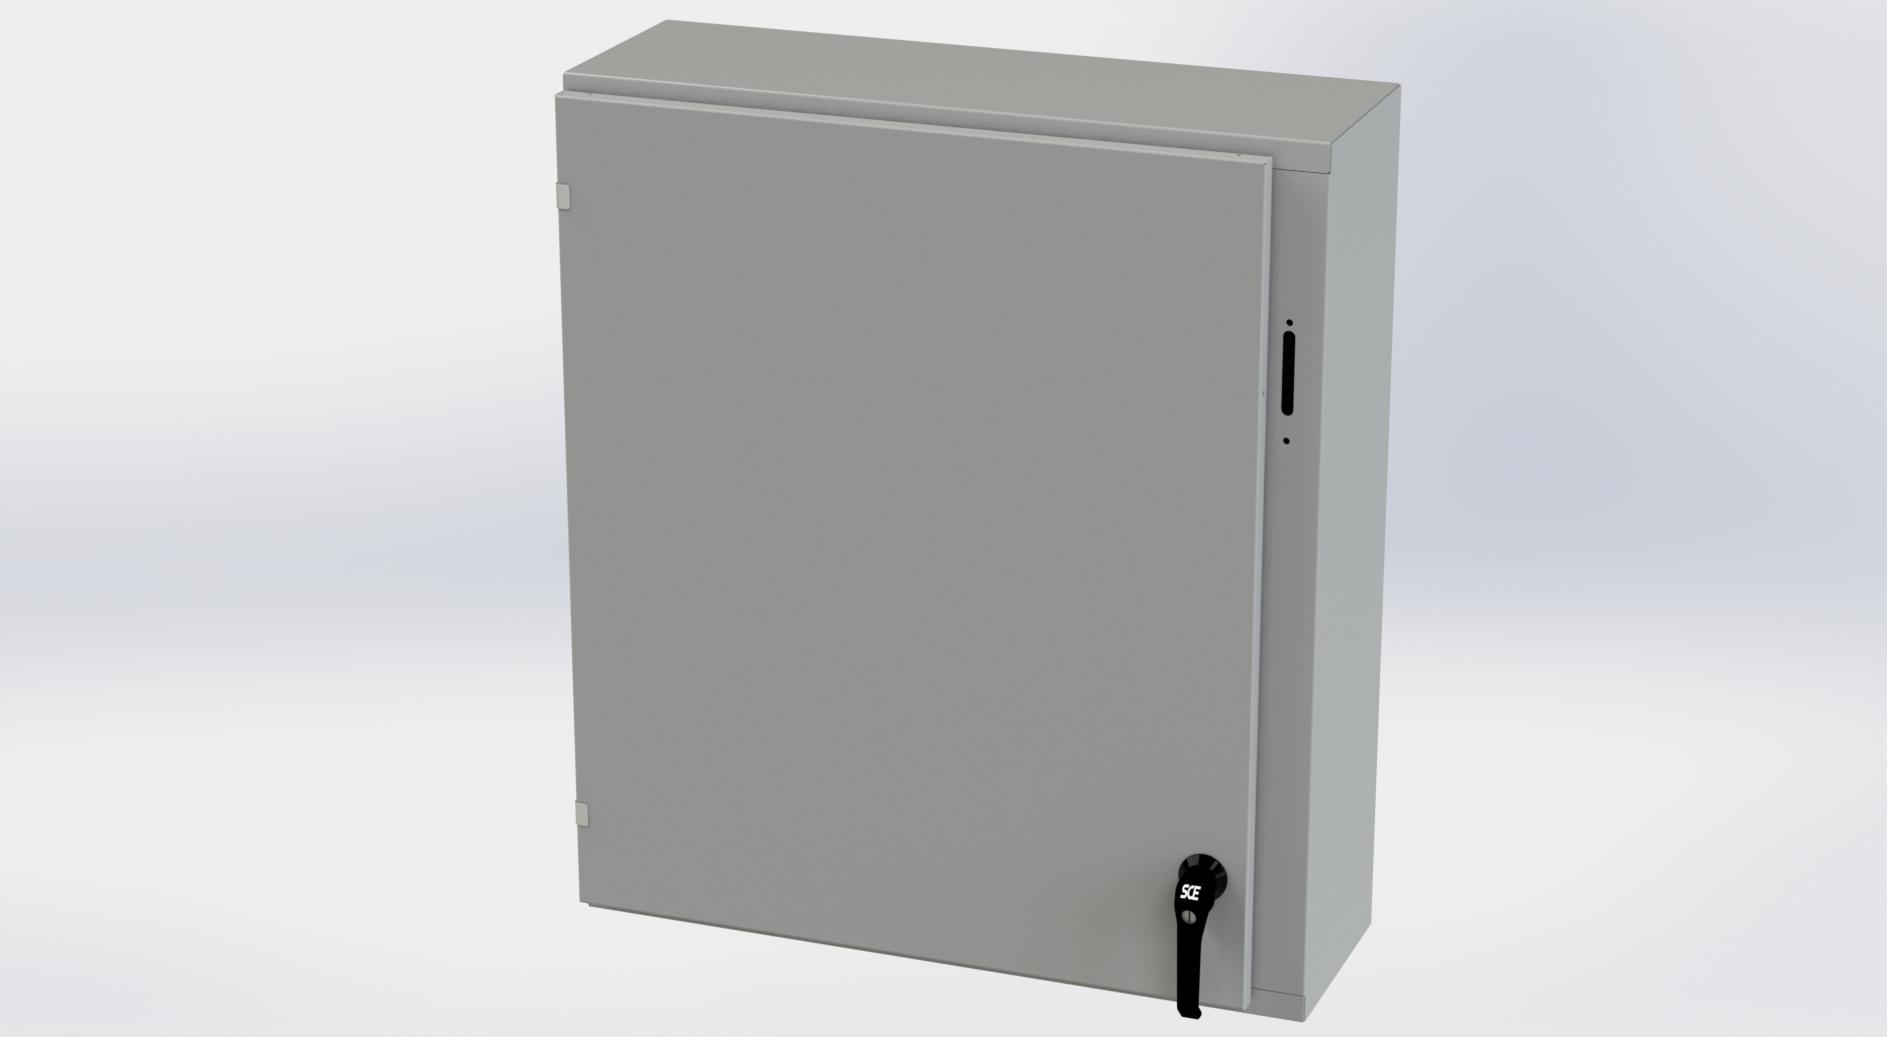 Saginaw Control SCE-36XEL3110LP XEL LP Enclosure, Height:36.00", Width:31.38", Depth:10.00", ANSI-61 gray powder coating inside and out. Optional sub-panels are powder coated white.